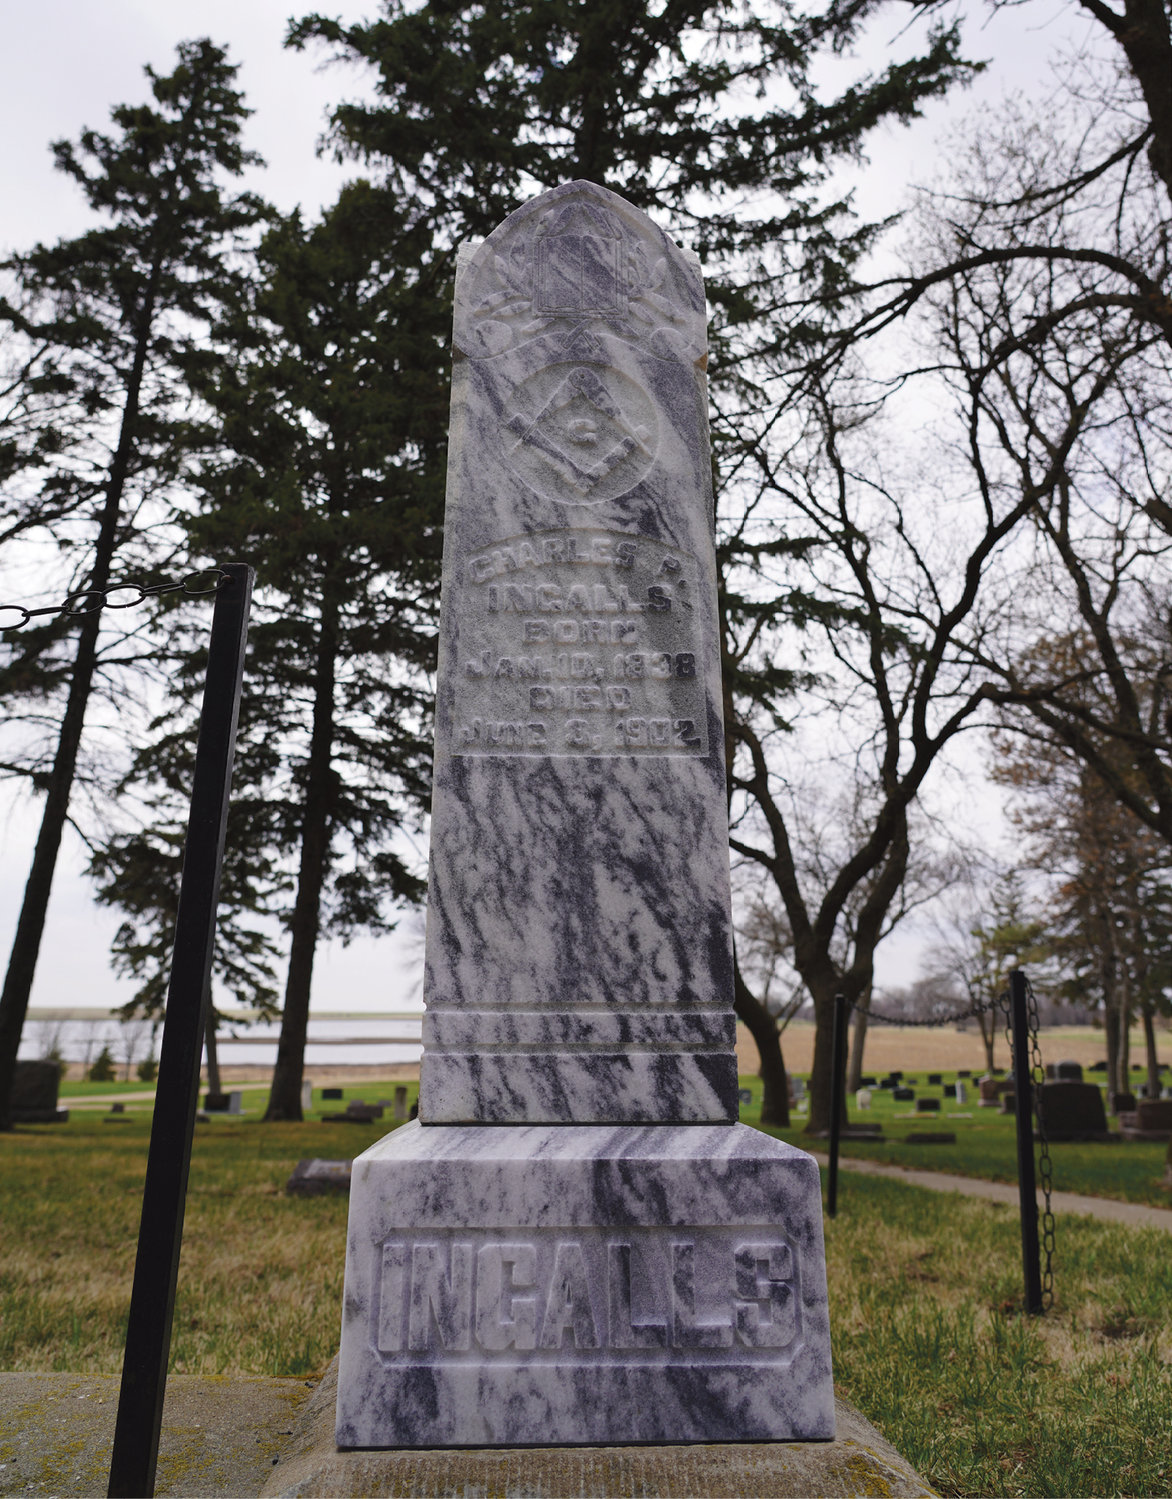 Charles P. Ingalls born Jan. 10, 1838, died June 8, 1902, can now be read on Pa’s tombstone. Rausch Brothers Monument Company, Inc. in Ortonville, Minn., re-etched the marble grave marker and remounted it at the De Smet Cemetery. The return is just in time for the tourist season.